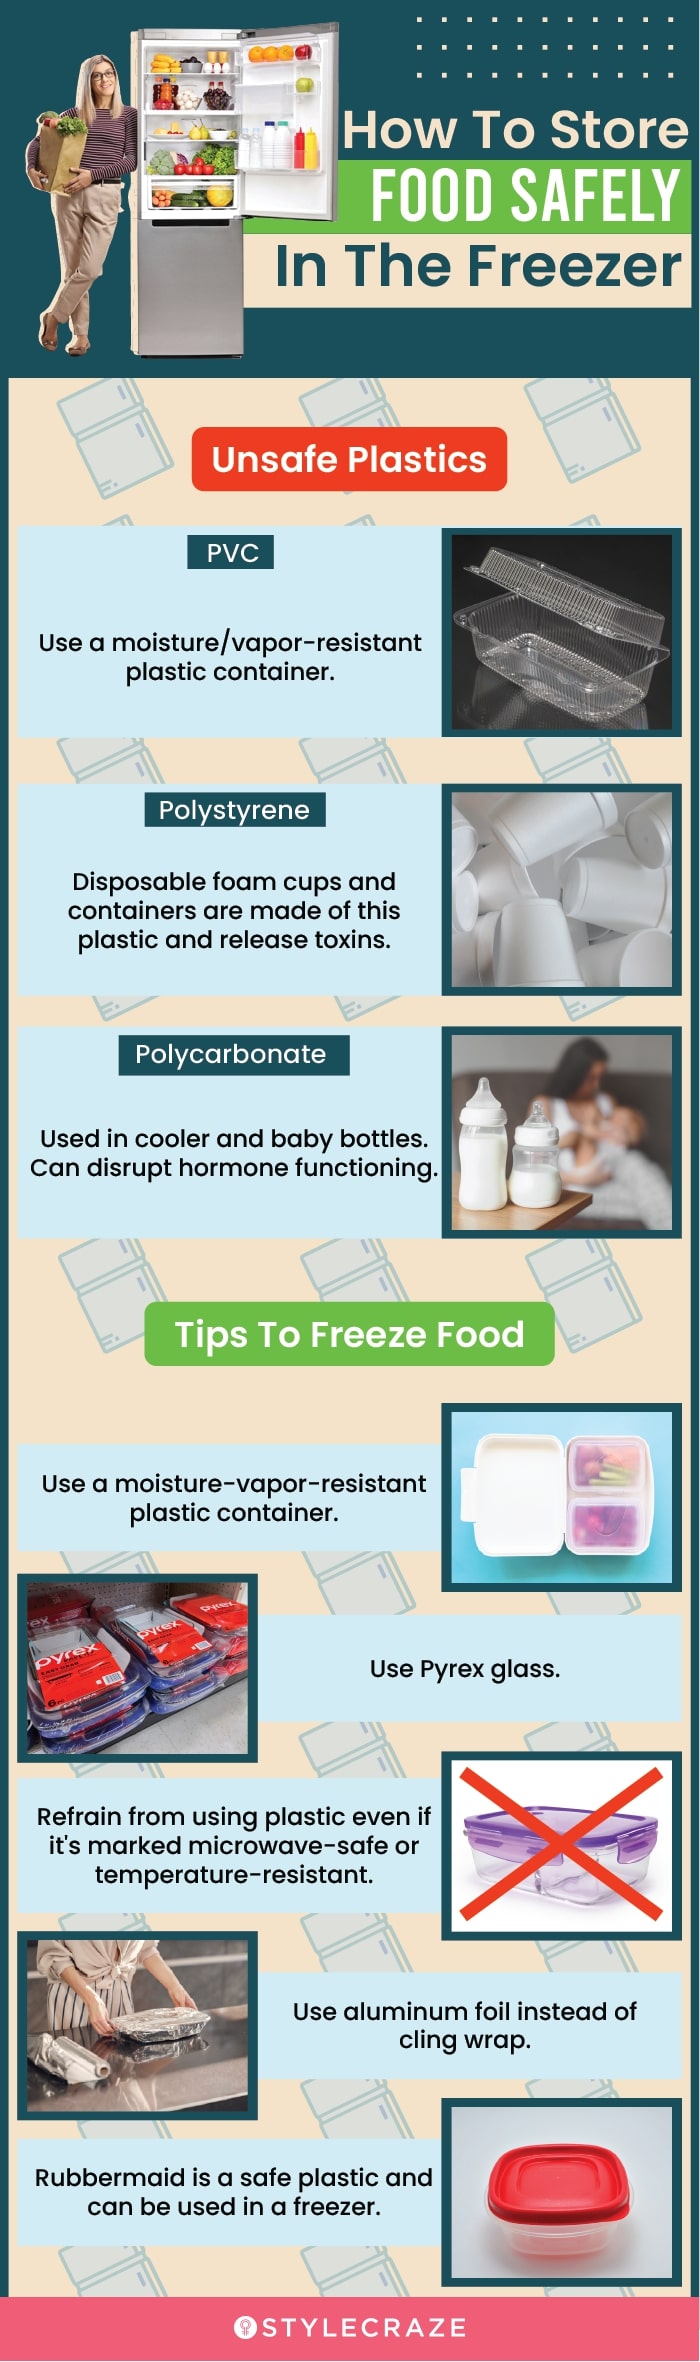 how to store food safety in the freezer[infographic]